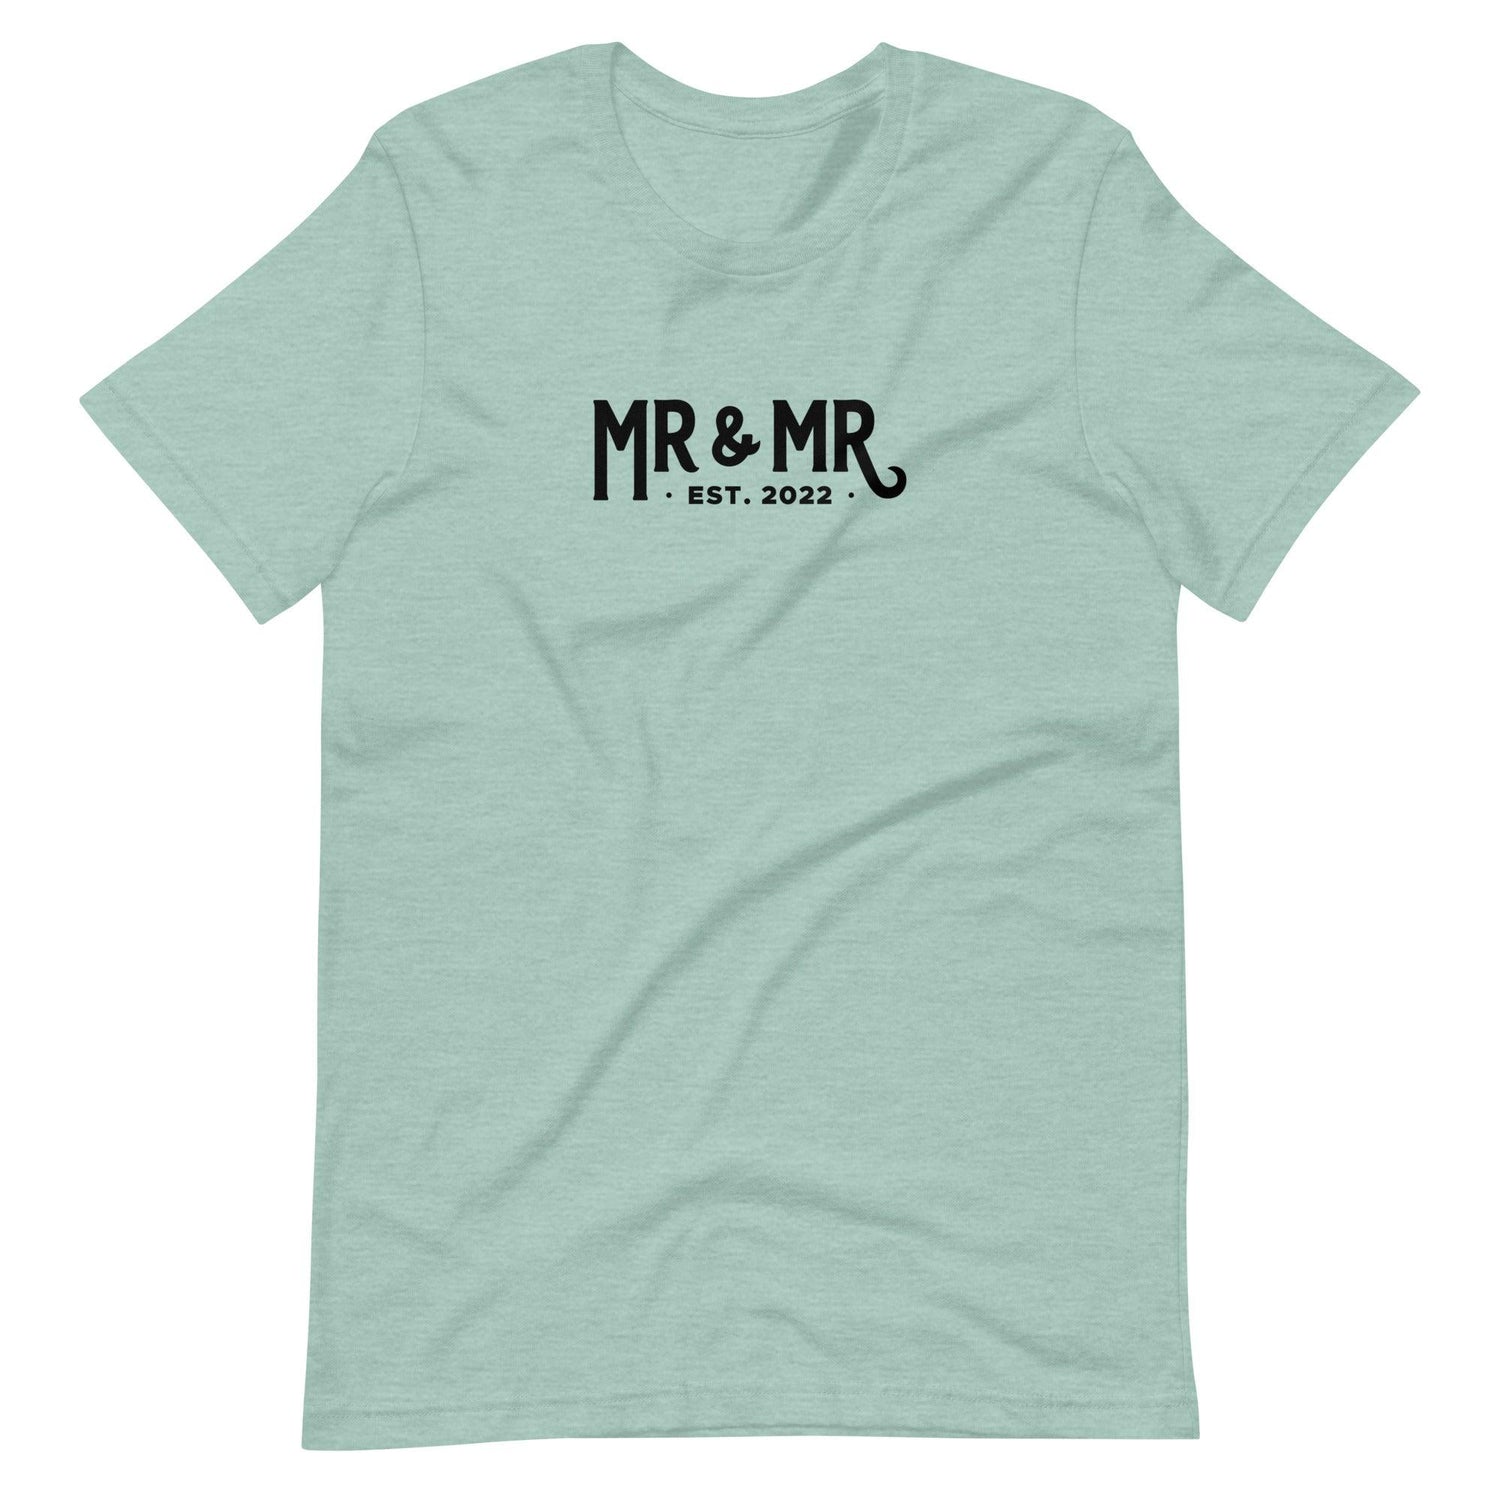 Mr and Mr Established 2022 Unisex t-shirt - Grooms - Engagement Gift for Couple - Anniversary by Oaklynn Lane